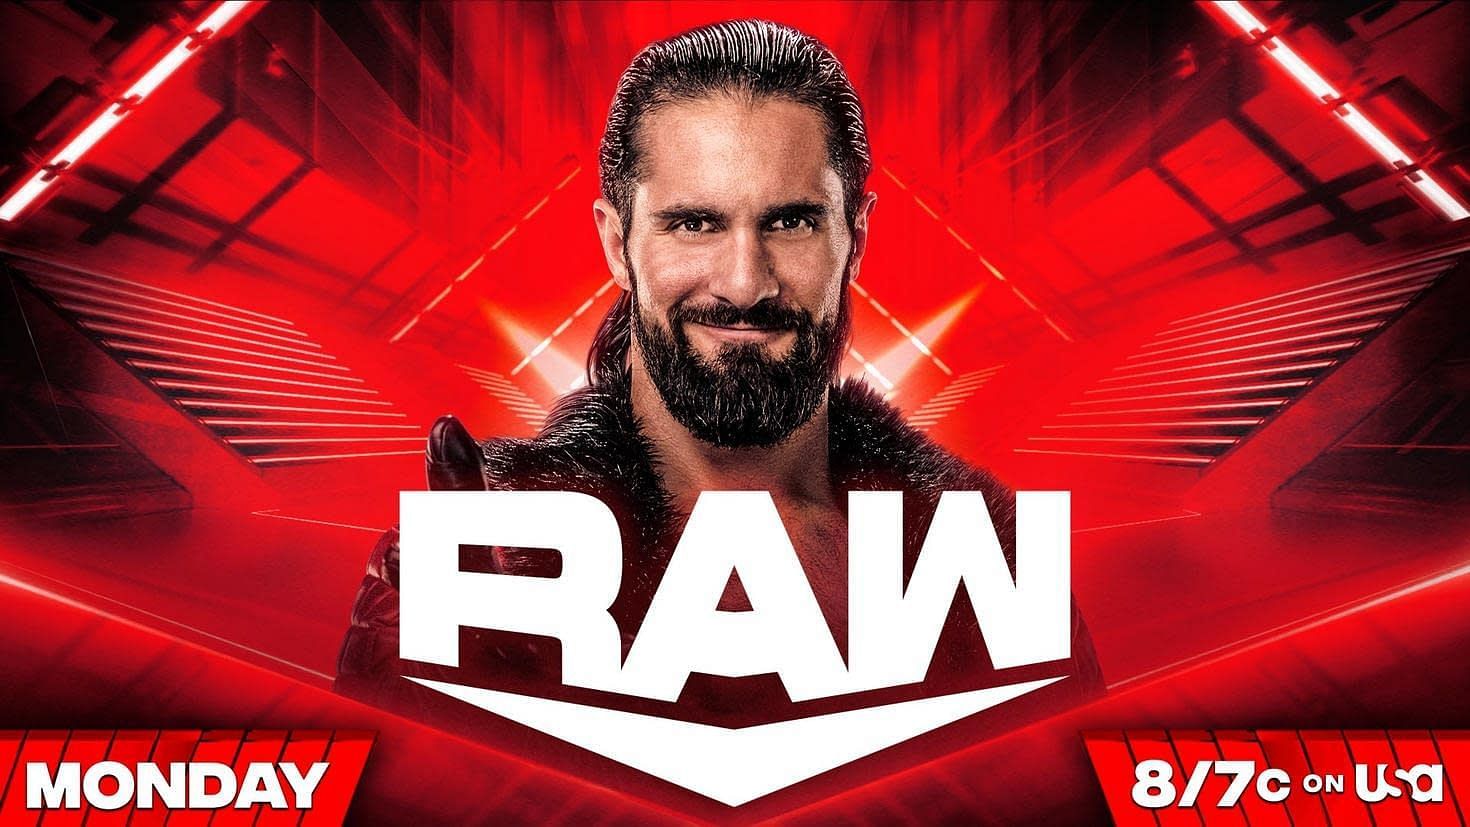 5 Surprises that can happen on RAW after MITB: Popular star to return after 4 months as a heel, no SummerSlam plans for newly crowned champion?